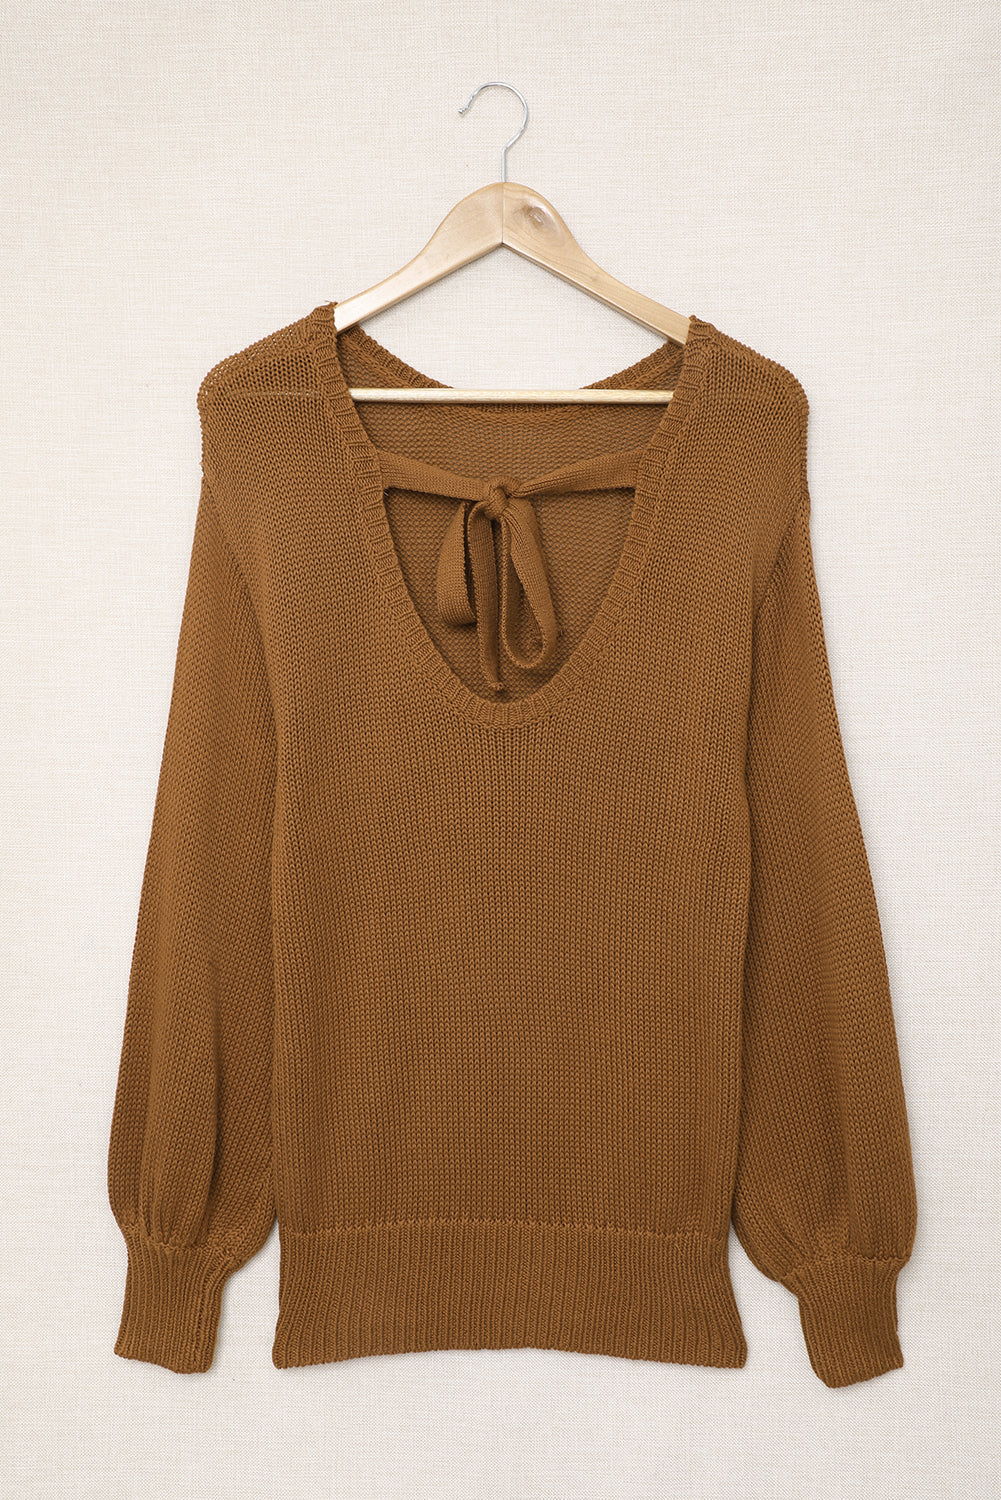 White Drop Shoulder Back Cut-out Sweater with Tie